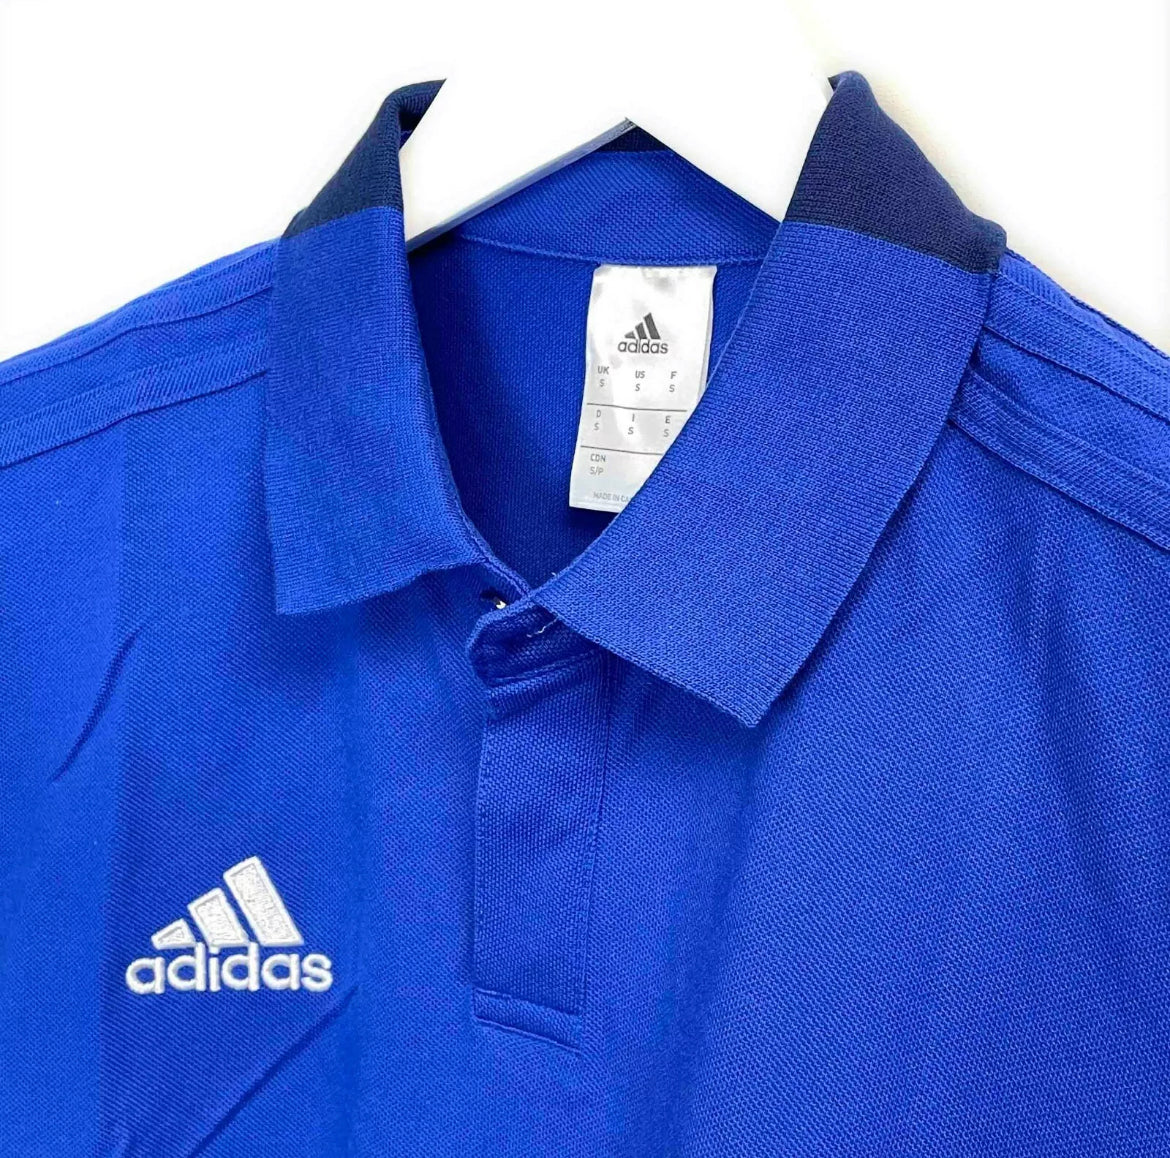 Performance Top Men’s Polo Shirt in Blue L